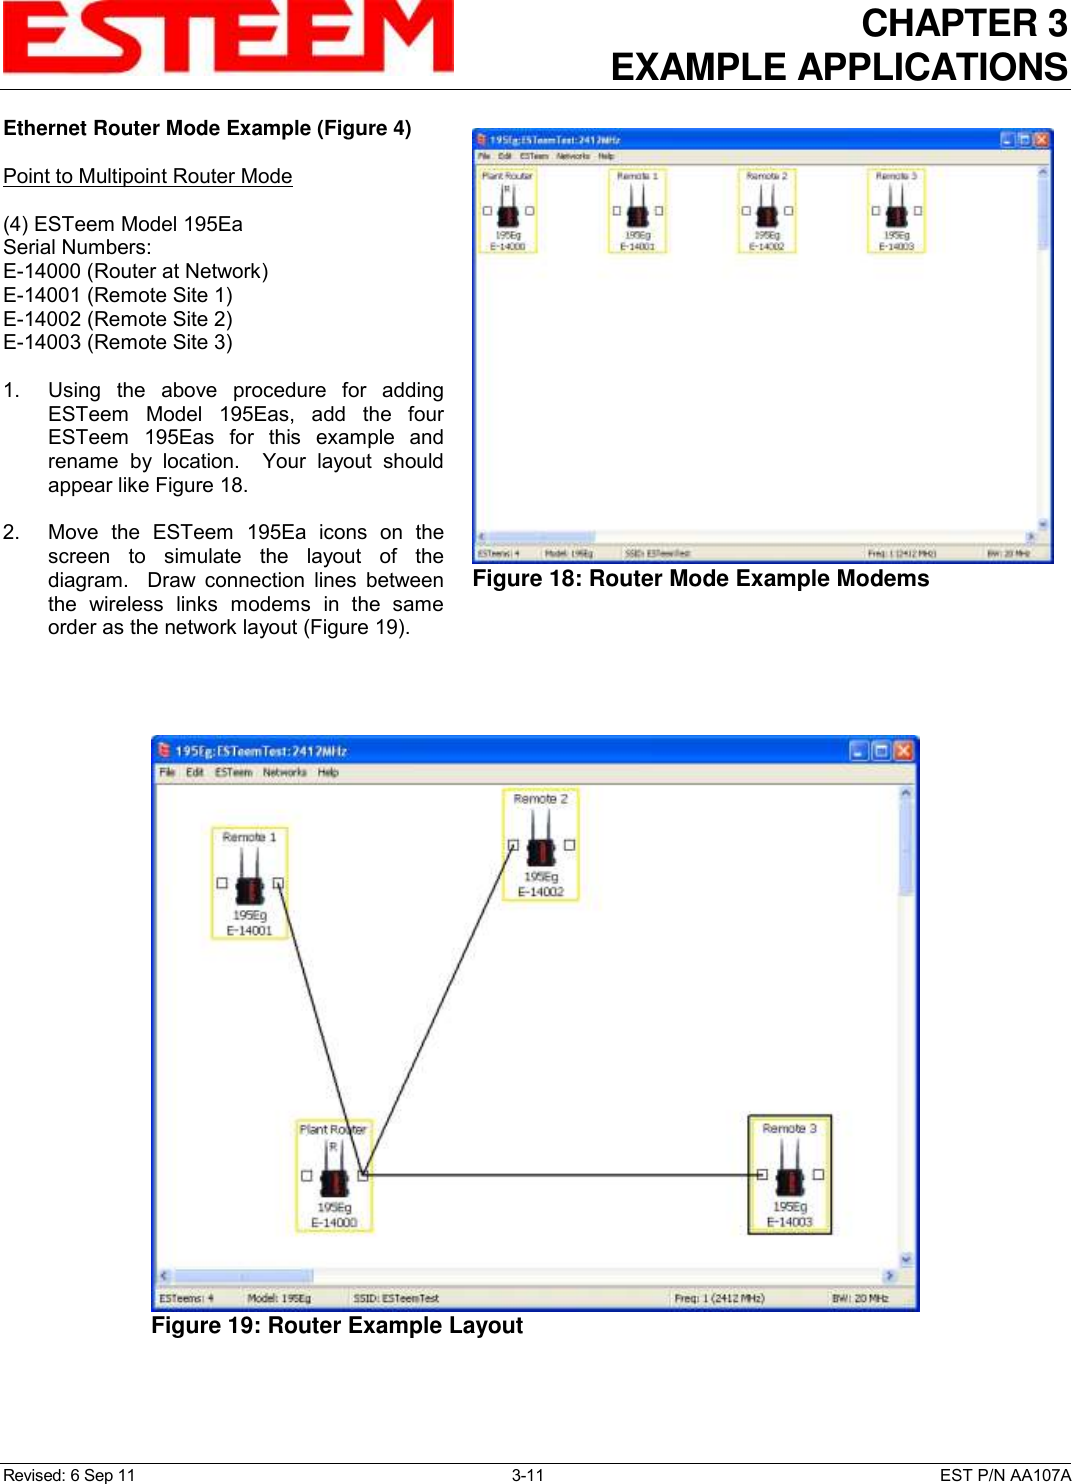 CHAPTER 3 EXAMPLE APPLICATIONS  Revised: 6 Sep 11  3-11  EST P/N AA107A Ethernet Router Mode Example (Figure 4)  Point to Multipoint Router Mode  (4) ESTeem Model 195Ea Serial Numbers: E-14000 (Router at Network) E-14001 (Remote Site 1) E-14002 (Remote Site 2) E-14003 (Remote Site 3)  1.    Using  the  above  procedure  for  adding ESTeem  Model  195Eas,  add  the  four ESTeem  195Eas  for  this  example  and rename  by  location.    Your  layout  should appear like Figure 18.   2.    Move  the  ESTeem  195Ea  icons  on  the screen  to  simulate  the  layout  of  the diagram.    Draw  connection  lines  between the  wireless  links  modems  in  the  same order as the network layout (Figure 19).    Figure 18: Router Mode Example Modems    Figure 19: Router Example Layout 